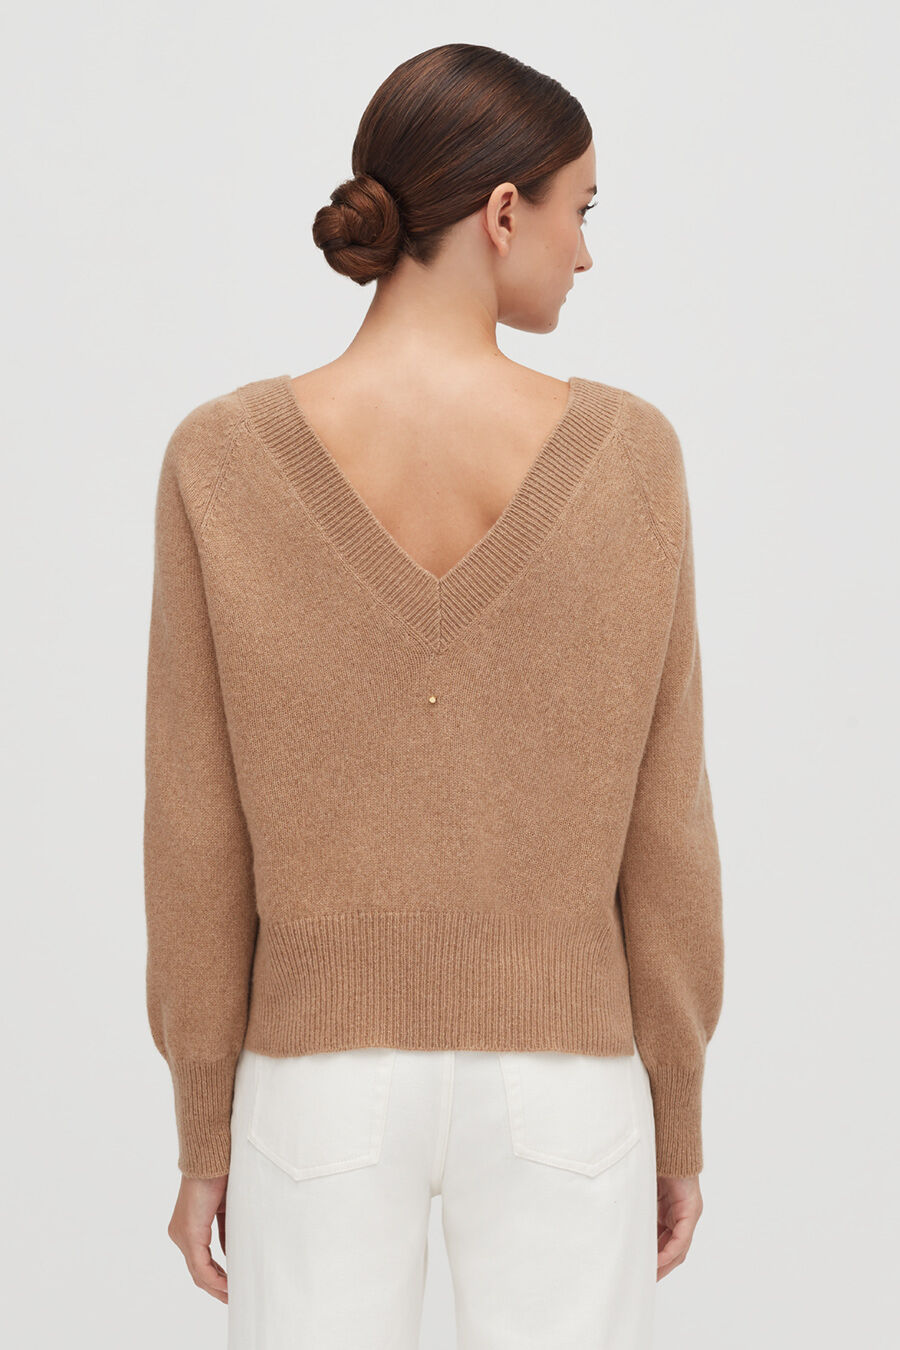 Woman in sweater with V-neck back standing with back to camera.